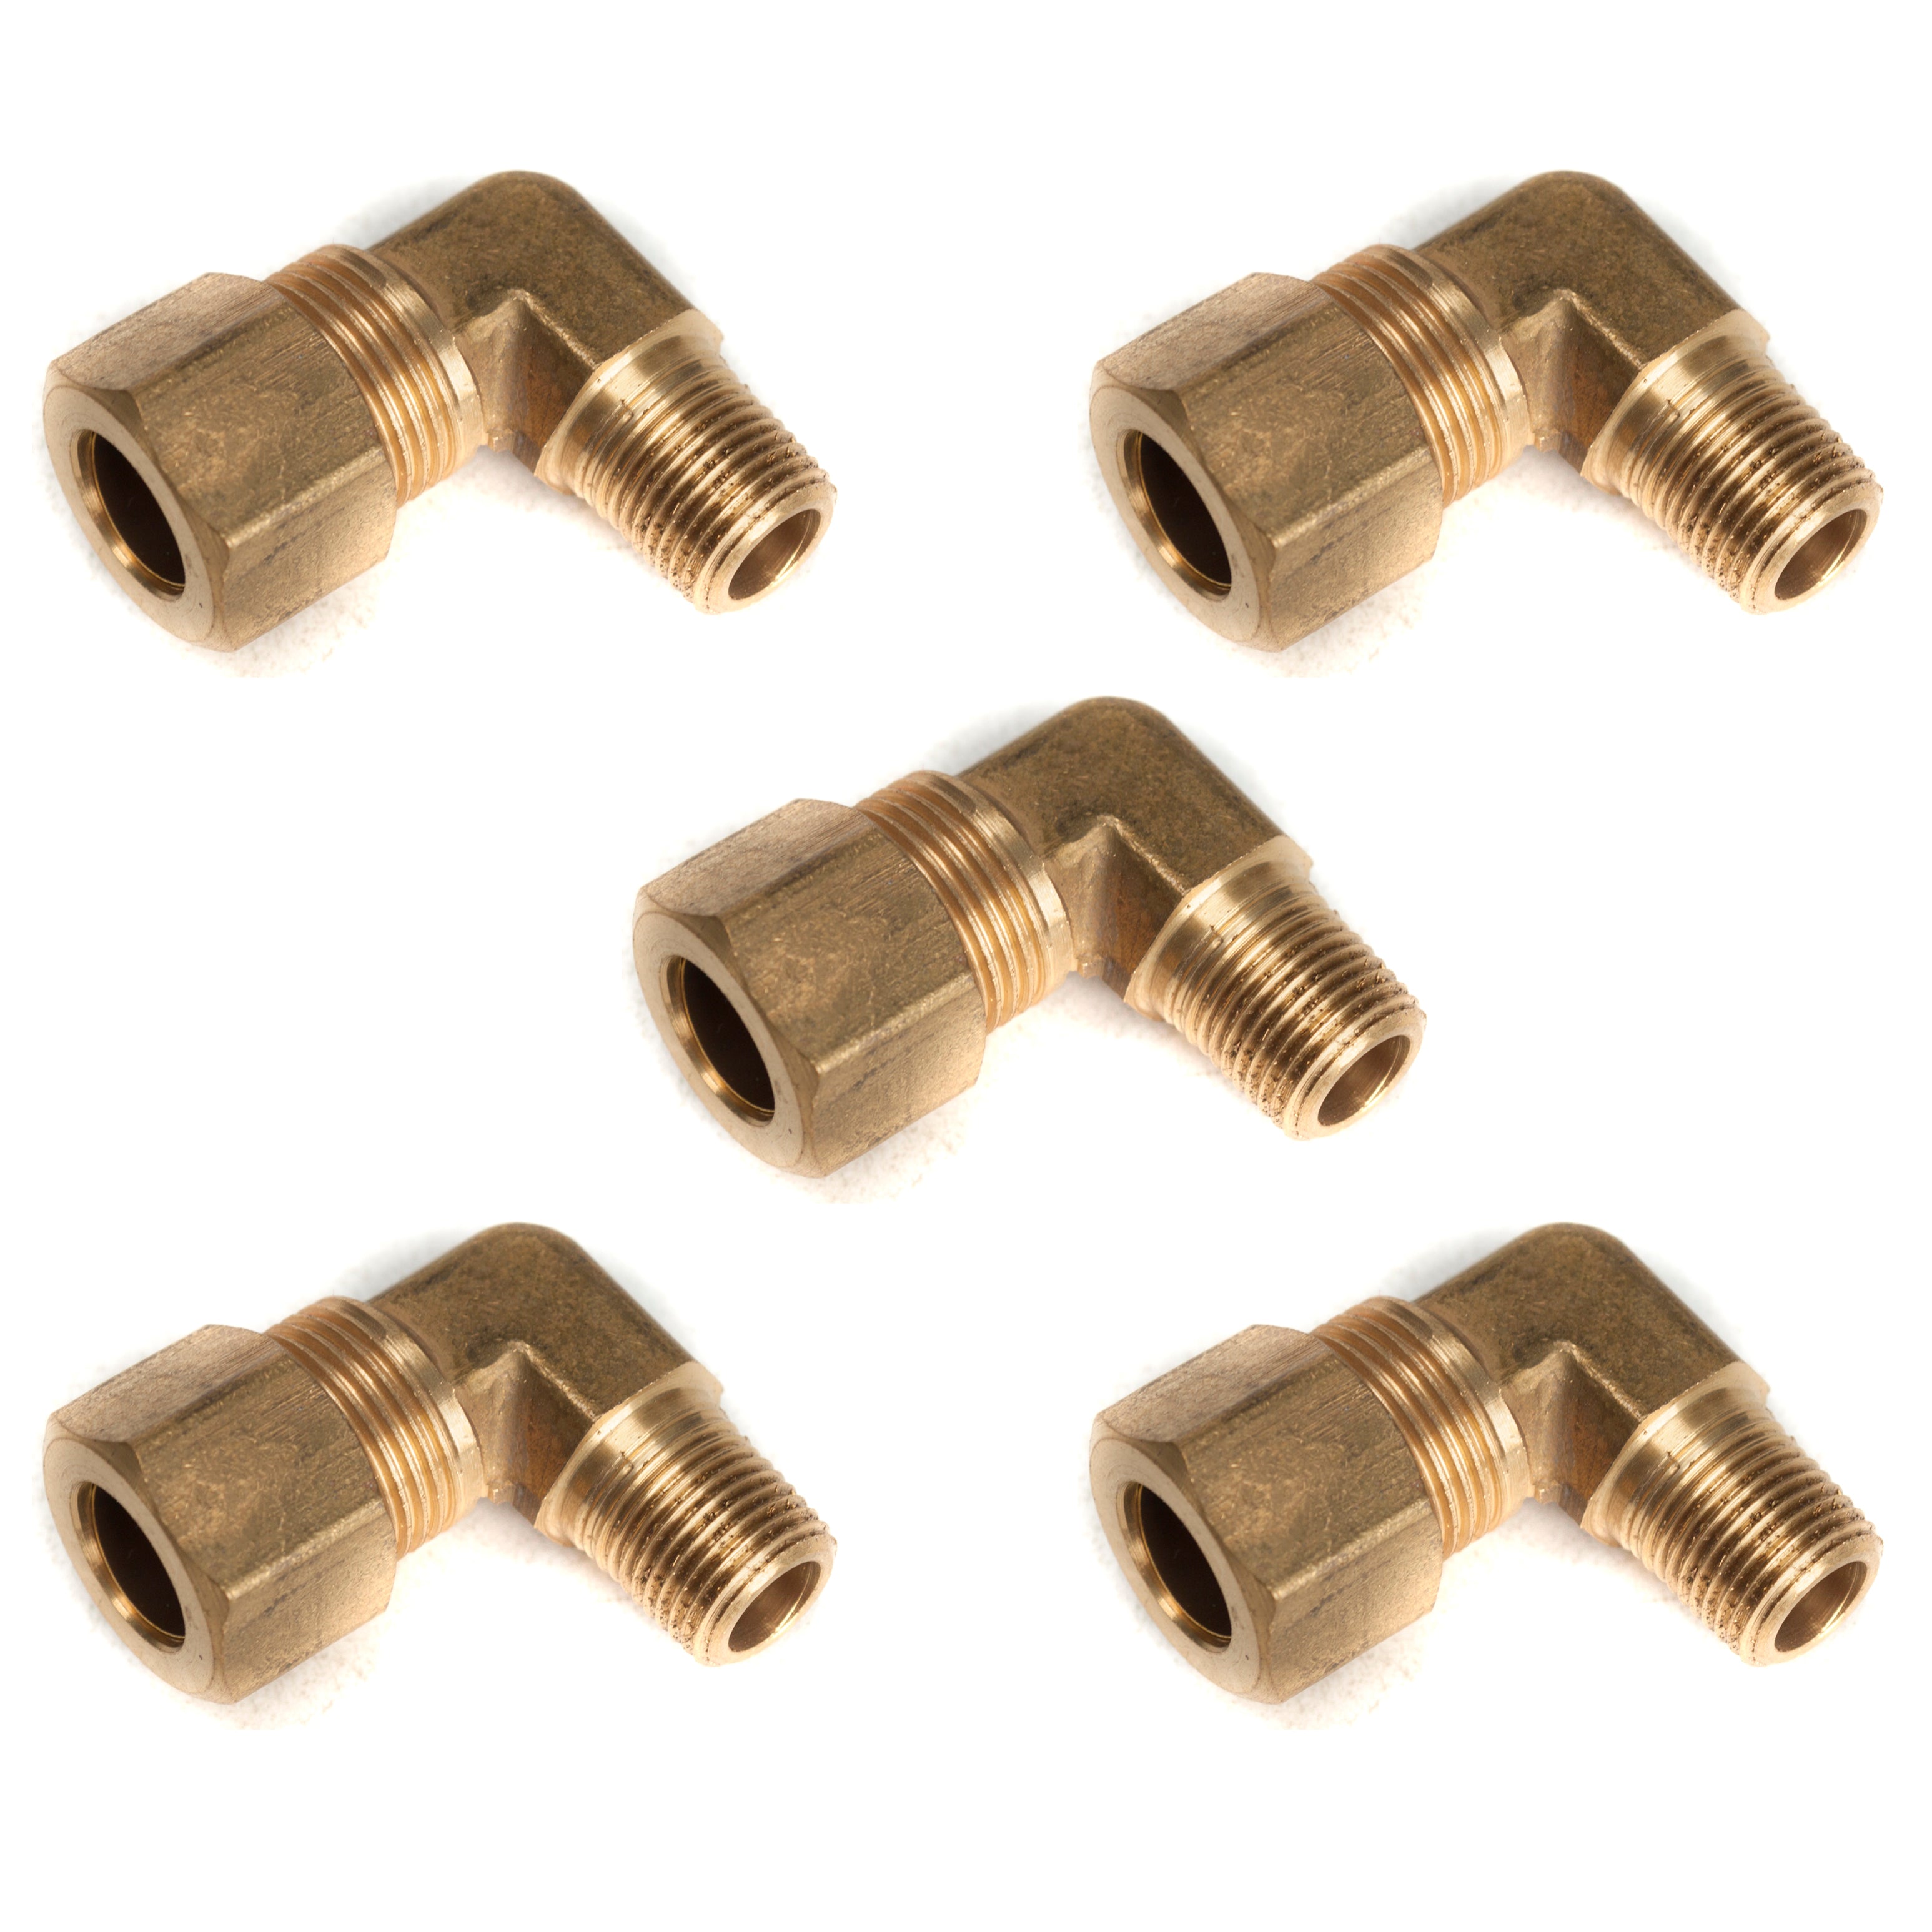 LTWFITTING 3/8-Inch OD x 1/8-Inch Male NPT 90 Degree Compression Elbow,Brass Compression Fitting(Pack of 5)